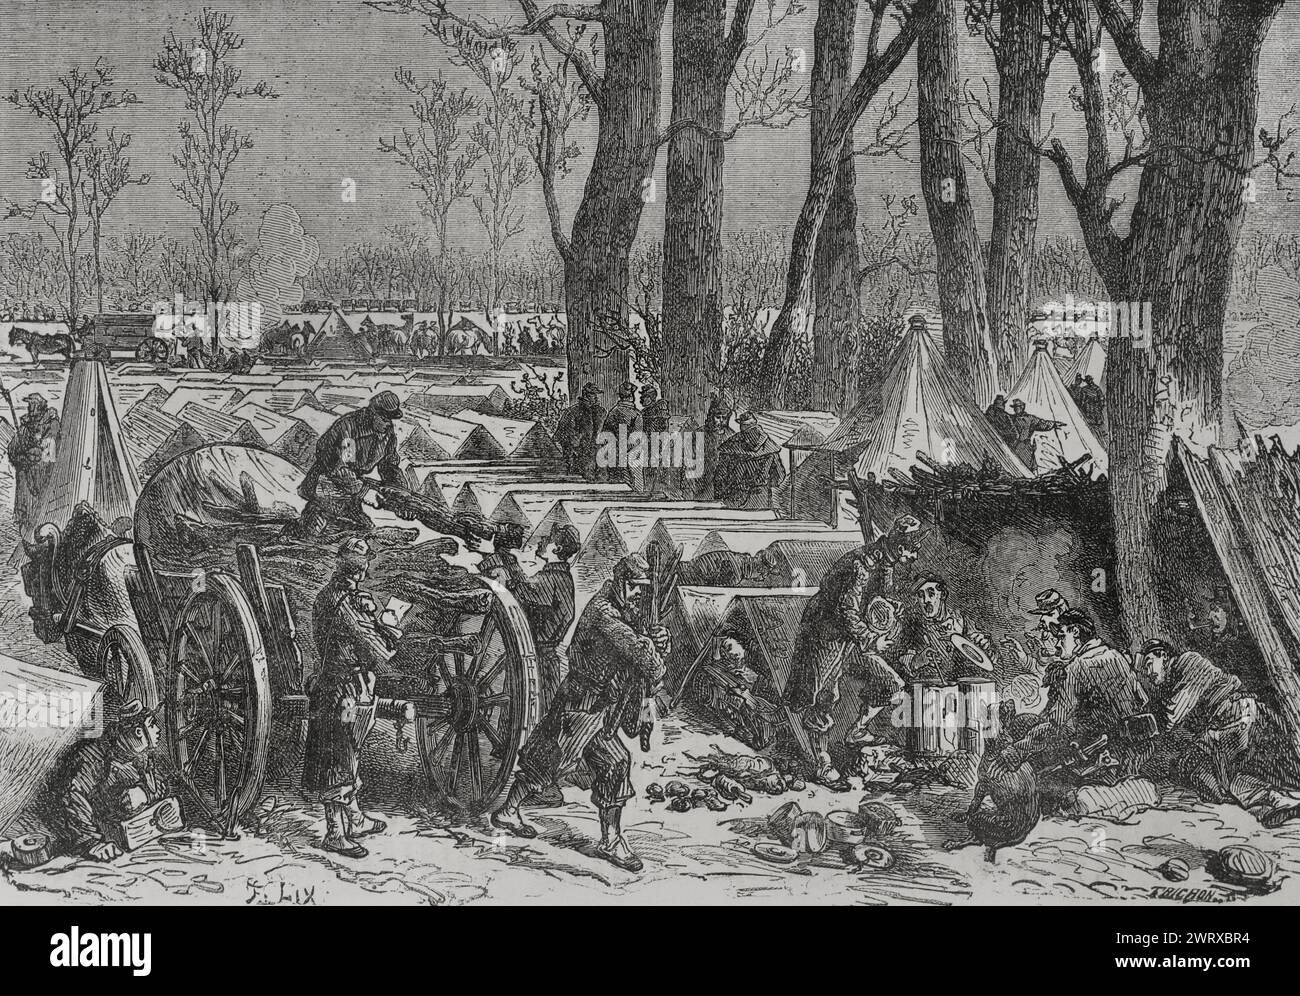 Franco-Prussian War (1870-1871). Siege of Paris (19 September 1870 to 28 January 1871). Bivouac of General Ducrot's troops in the wood of Vincennes. Engraving by Trichon. 'Historia de la Guerra de Francia y Prusia' (History of the War between France and Prussia). Volume II. Published in Barcelona, 1871. Stock Photo